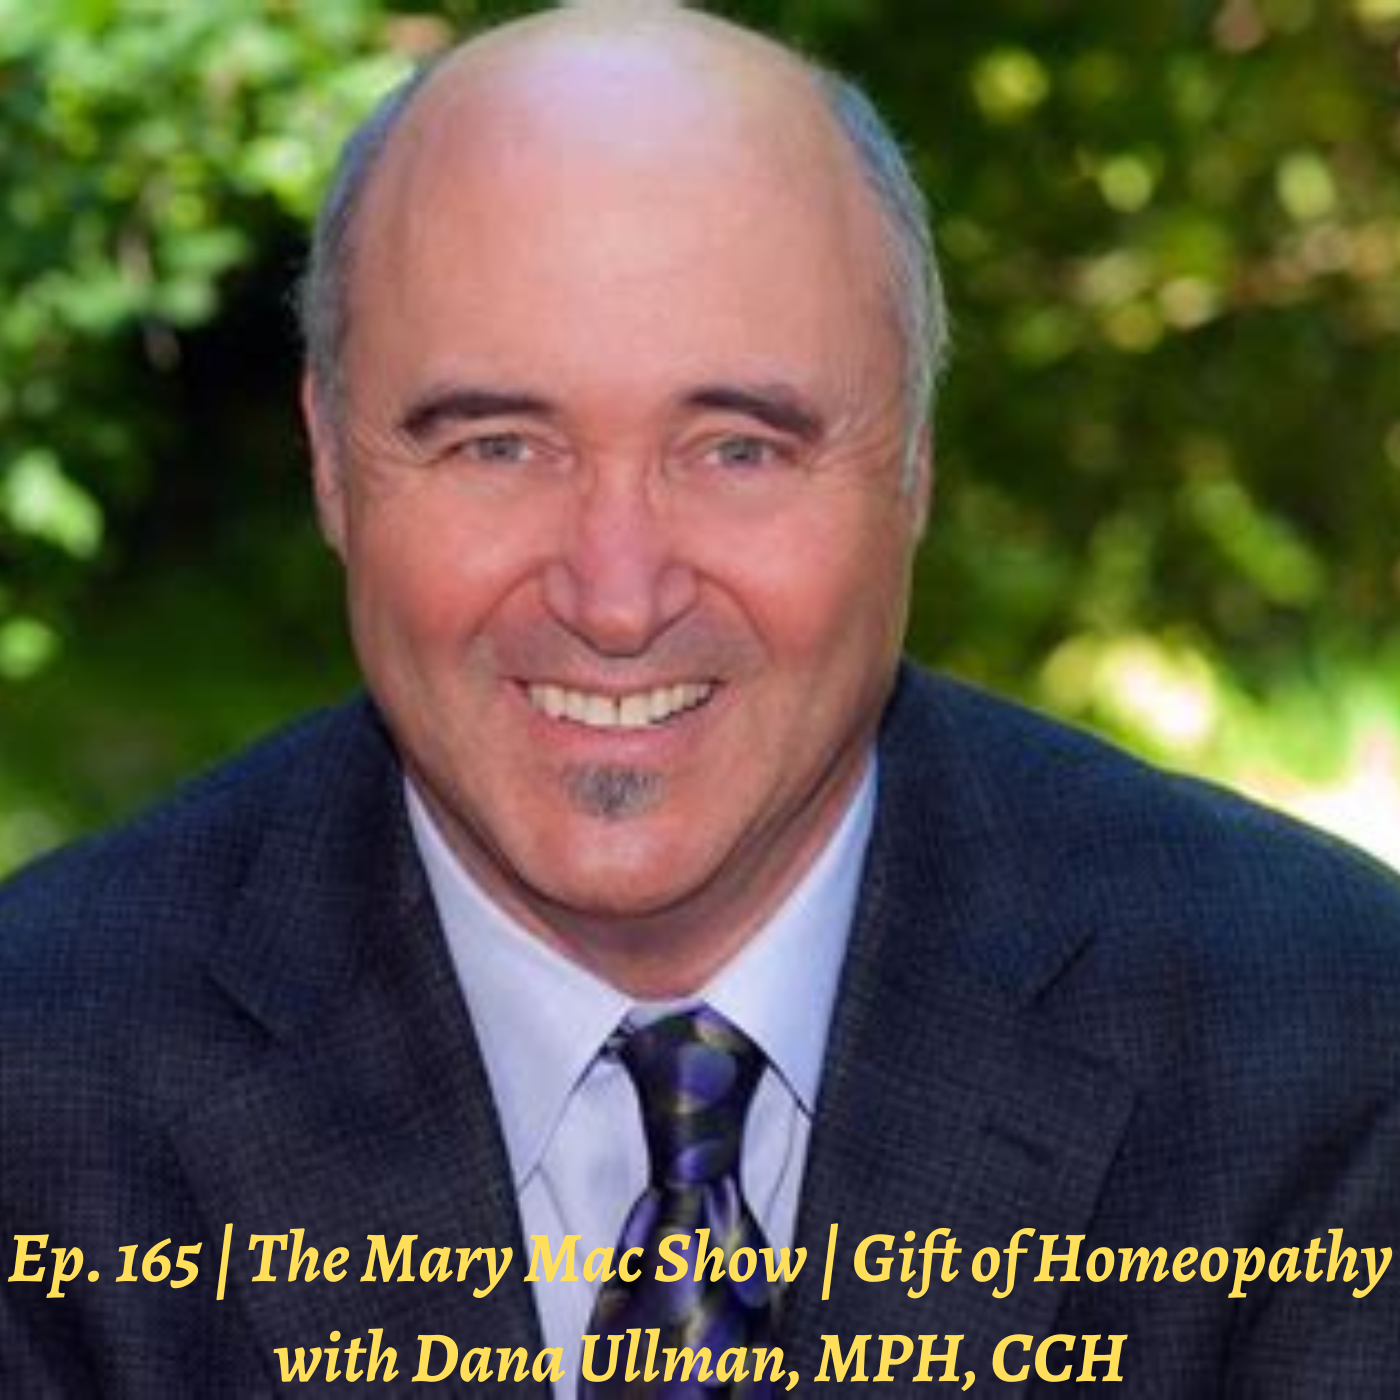 Gift of Homeopathy with Dana Ullman, MPH, CCH Image